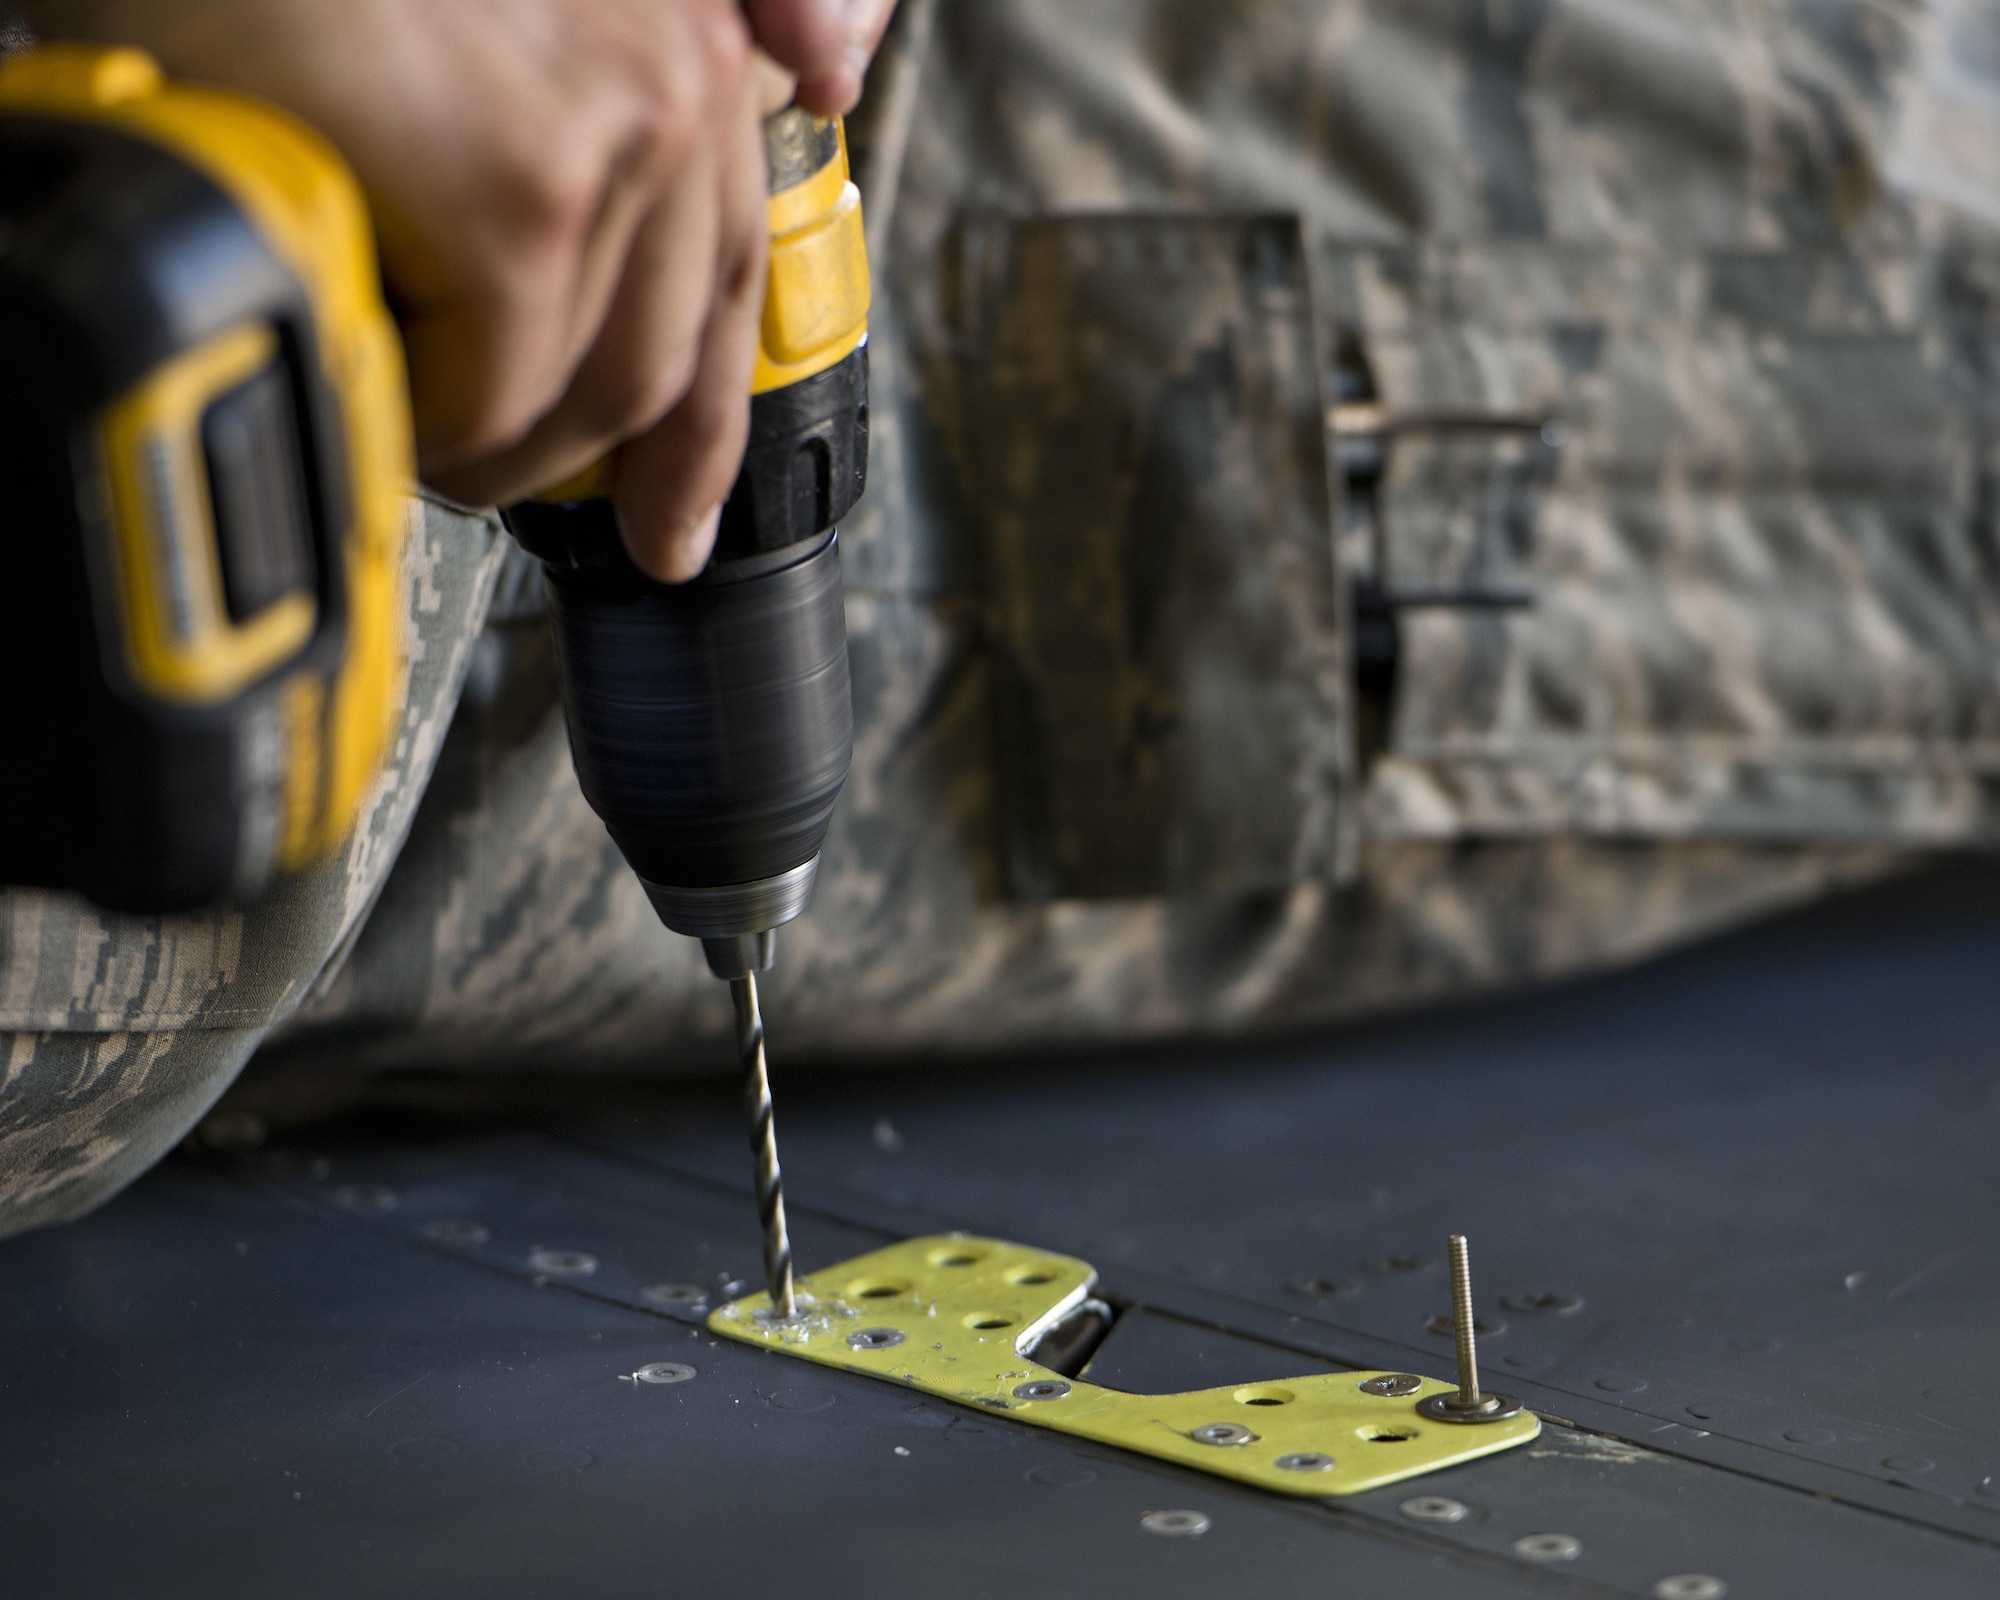 Airman 1st Class Anthony Walters, 5th Maintenance Squadron aircraft structural maintenance, drills a rivet atop the wing of a B-52H Stratofortress at Minot Air Force Base, N.D., August 2, 2016. The yellow sheet metal patches are riveted down to repair cracked spoilers on the B-52s. (U.S. Air Force photo/Airman 1st Class J.T. Armstrong)